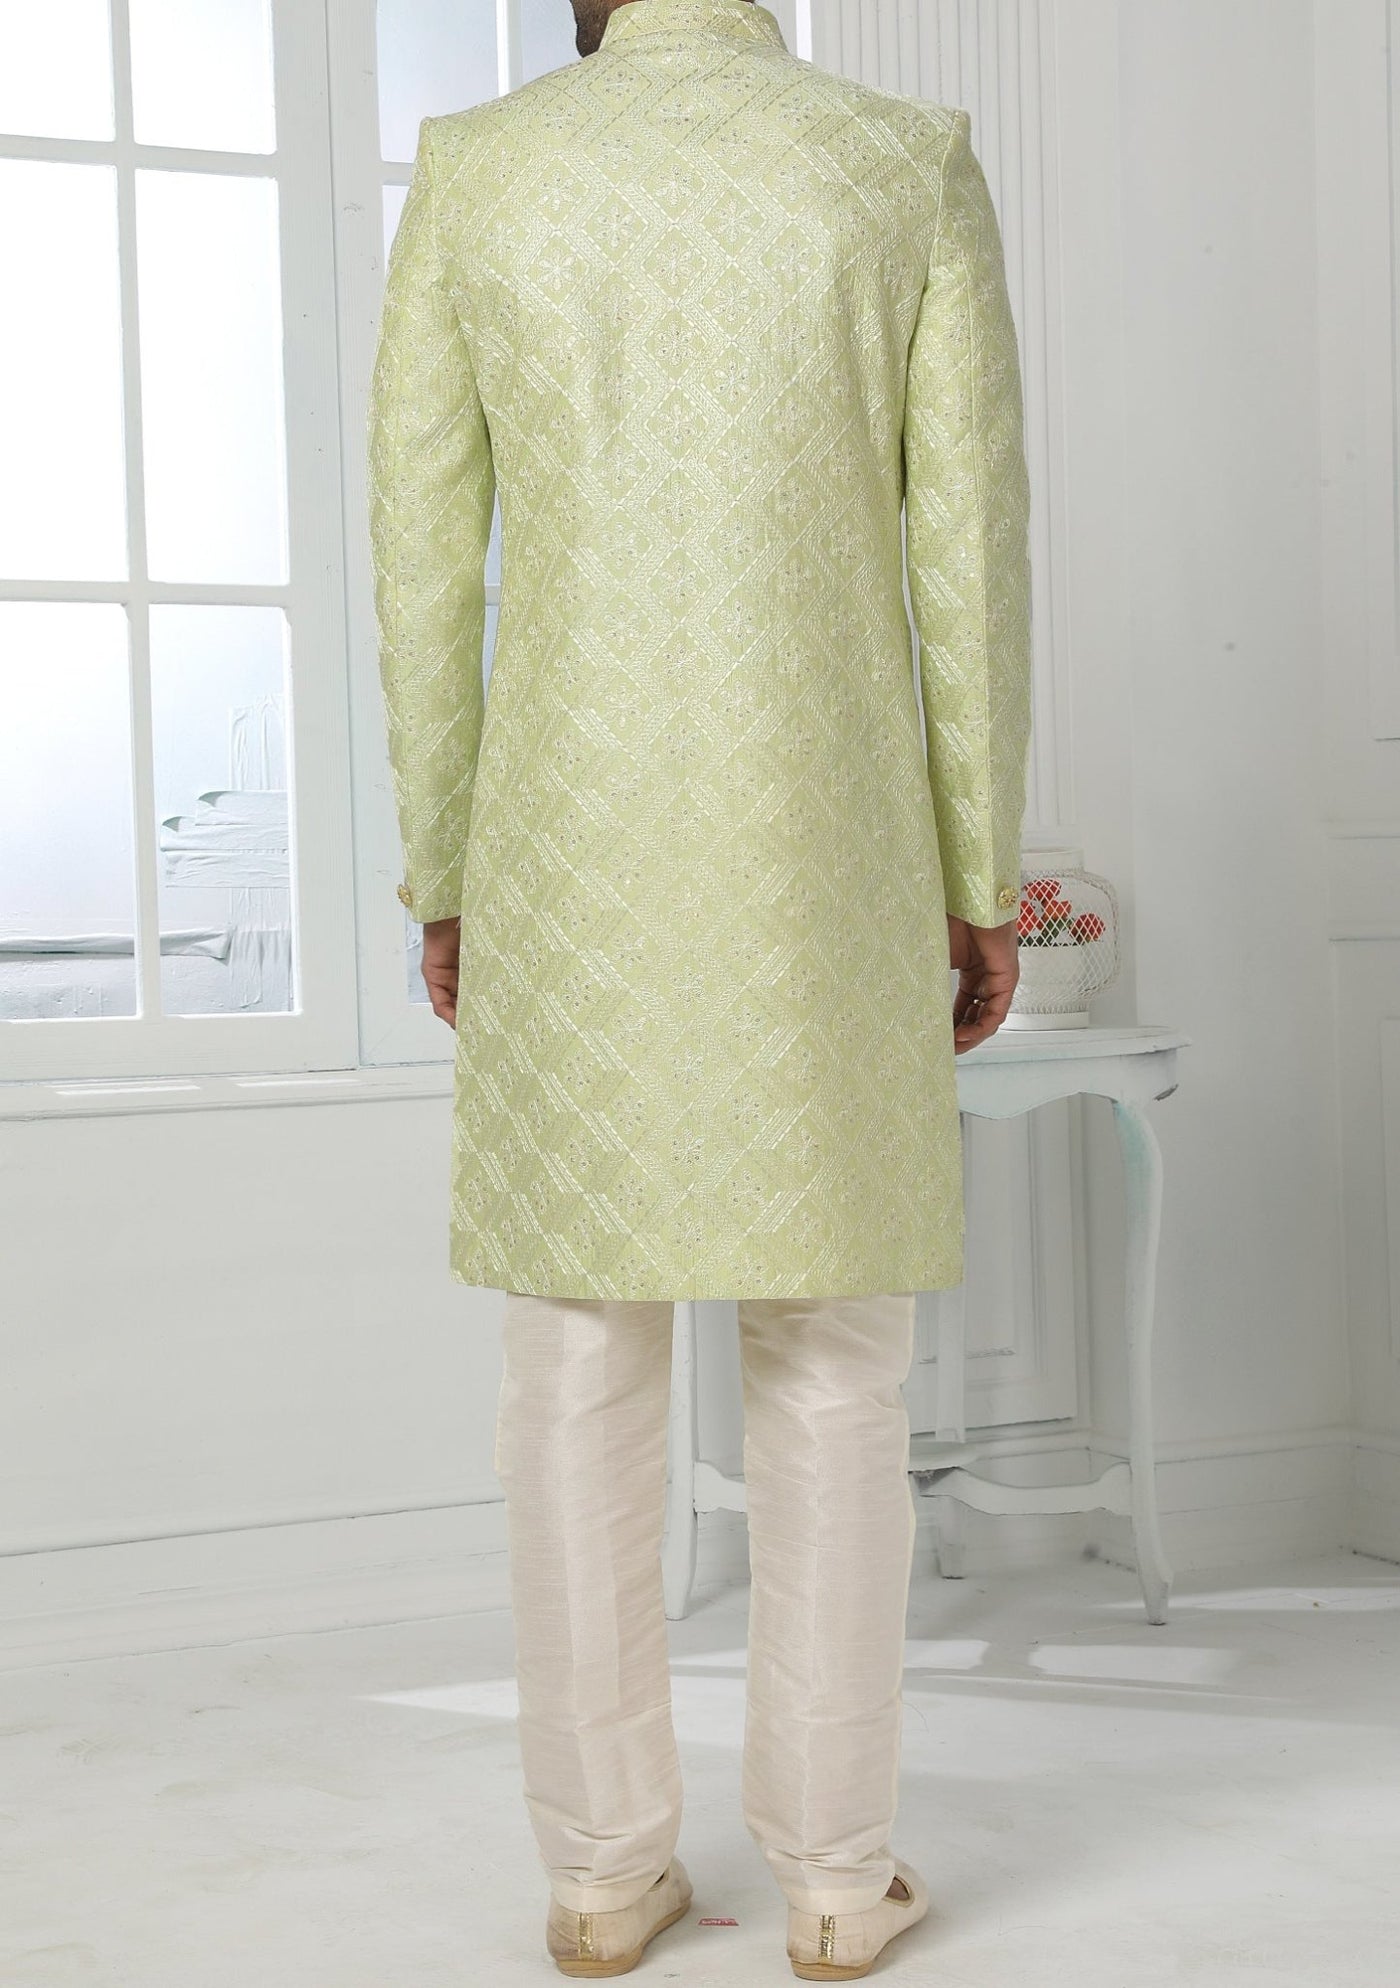 Men's Indo Western Party Wear Sherwani Suit With Jacket - db20430